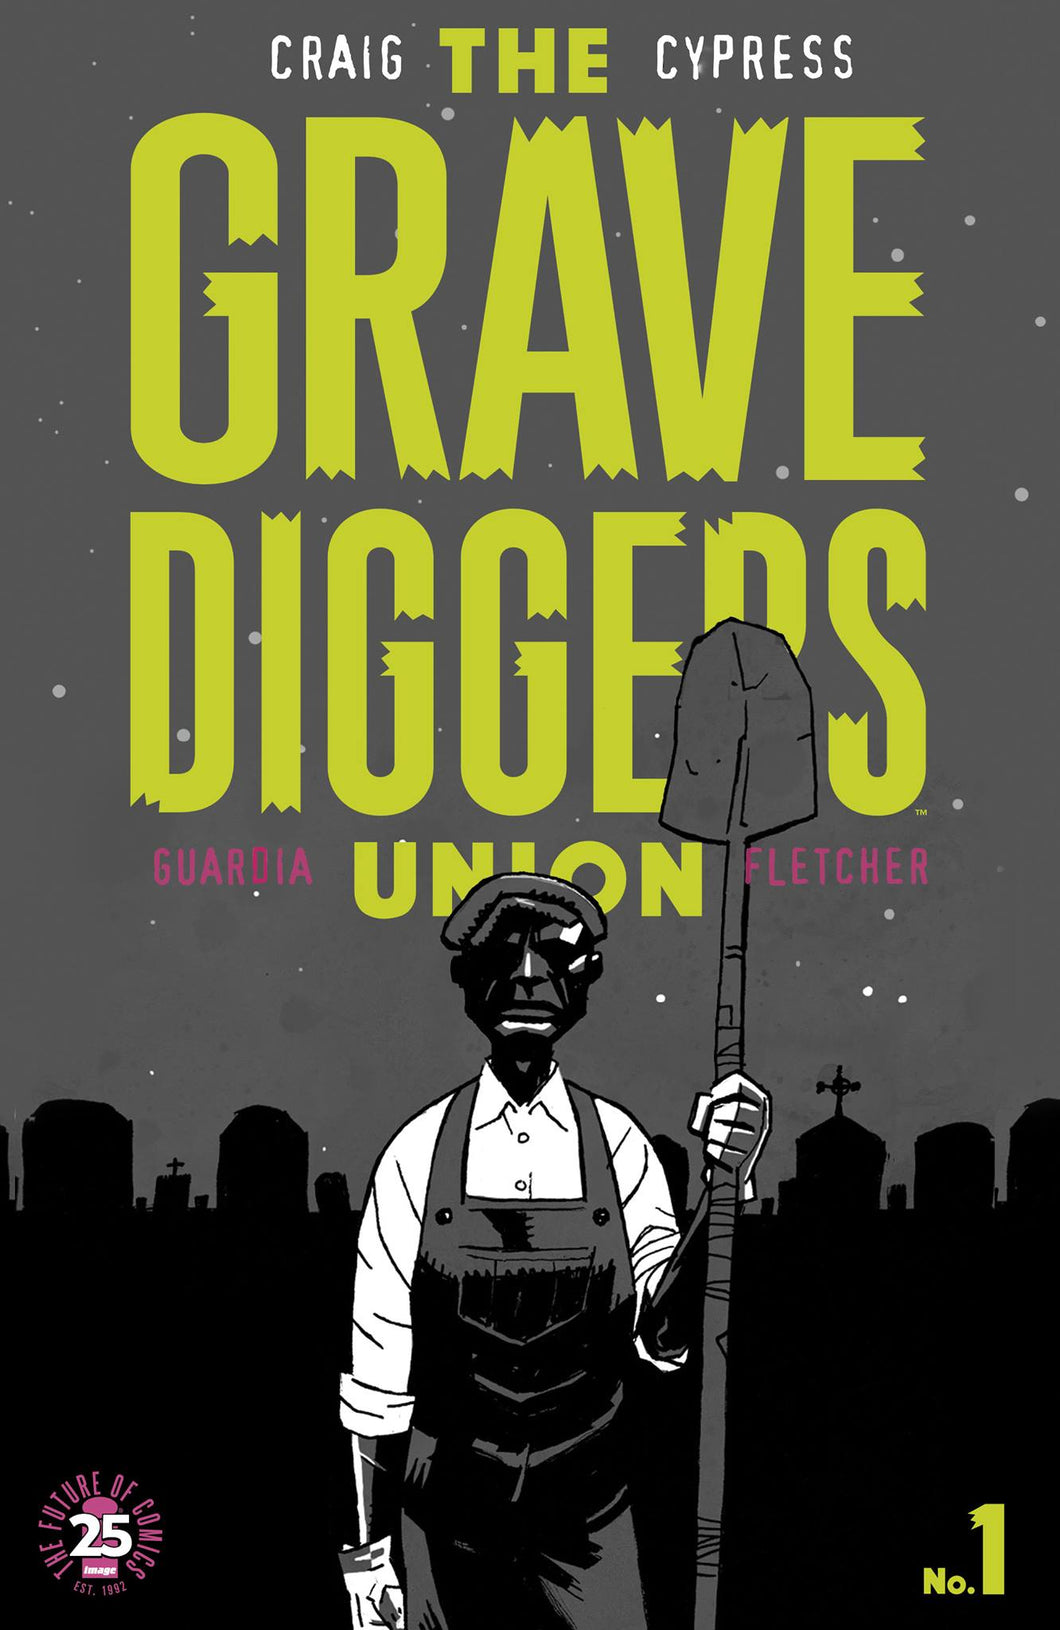 The Gravedigger's Union #1 - Image Exclusive Variant